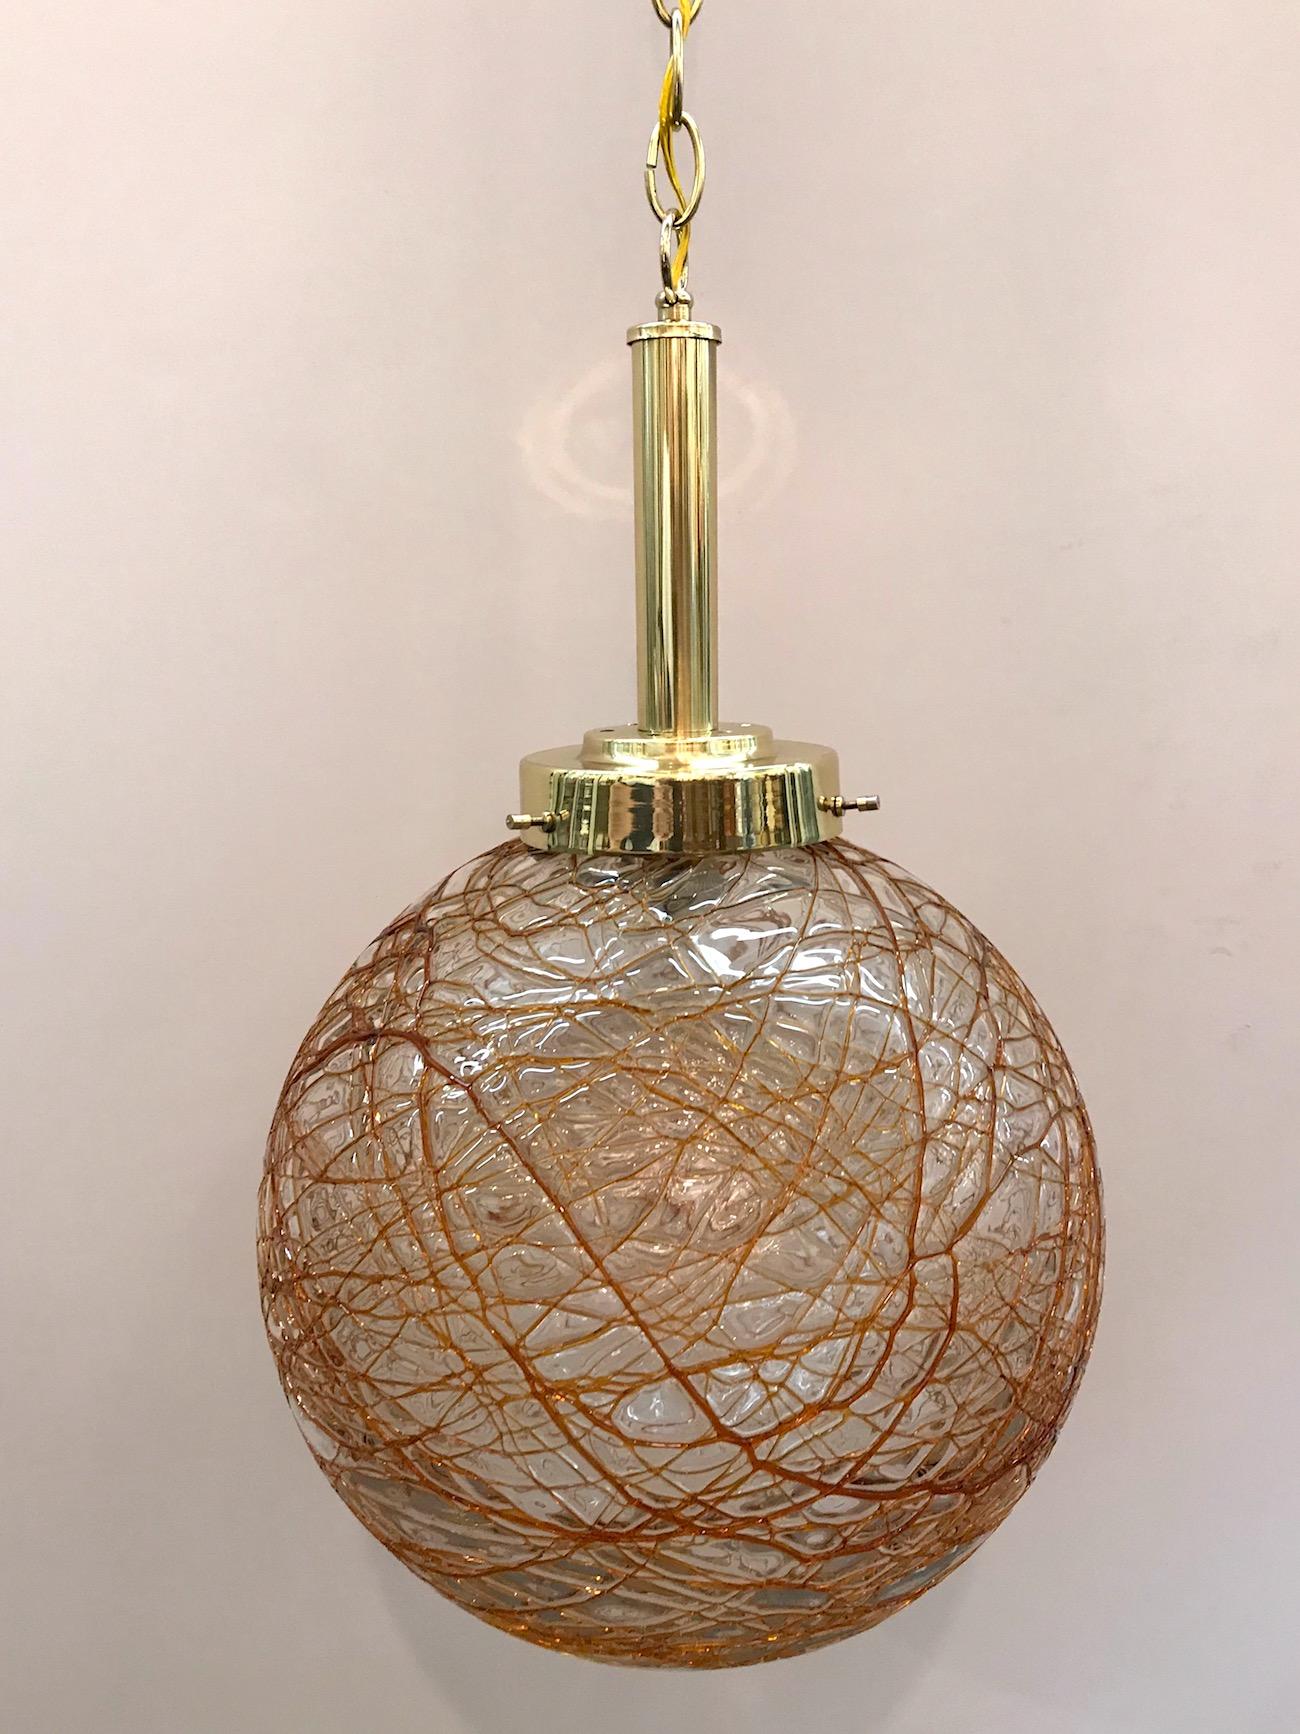 A lovely circa 1970s pendant light from Murano Italy. Globe shade of handblown clear glass with applied amber color glass splatter design. Brass mount, chain and original matching dome ceiling canopy. Diameter of globe is 12 inches. Pendant as